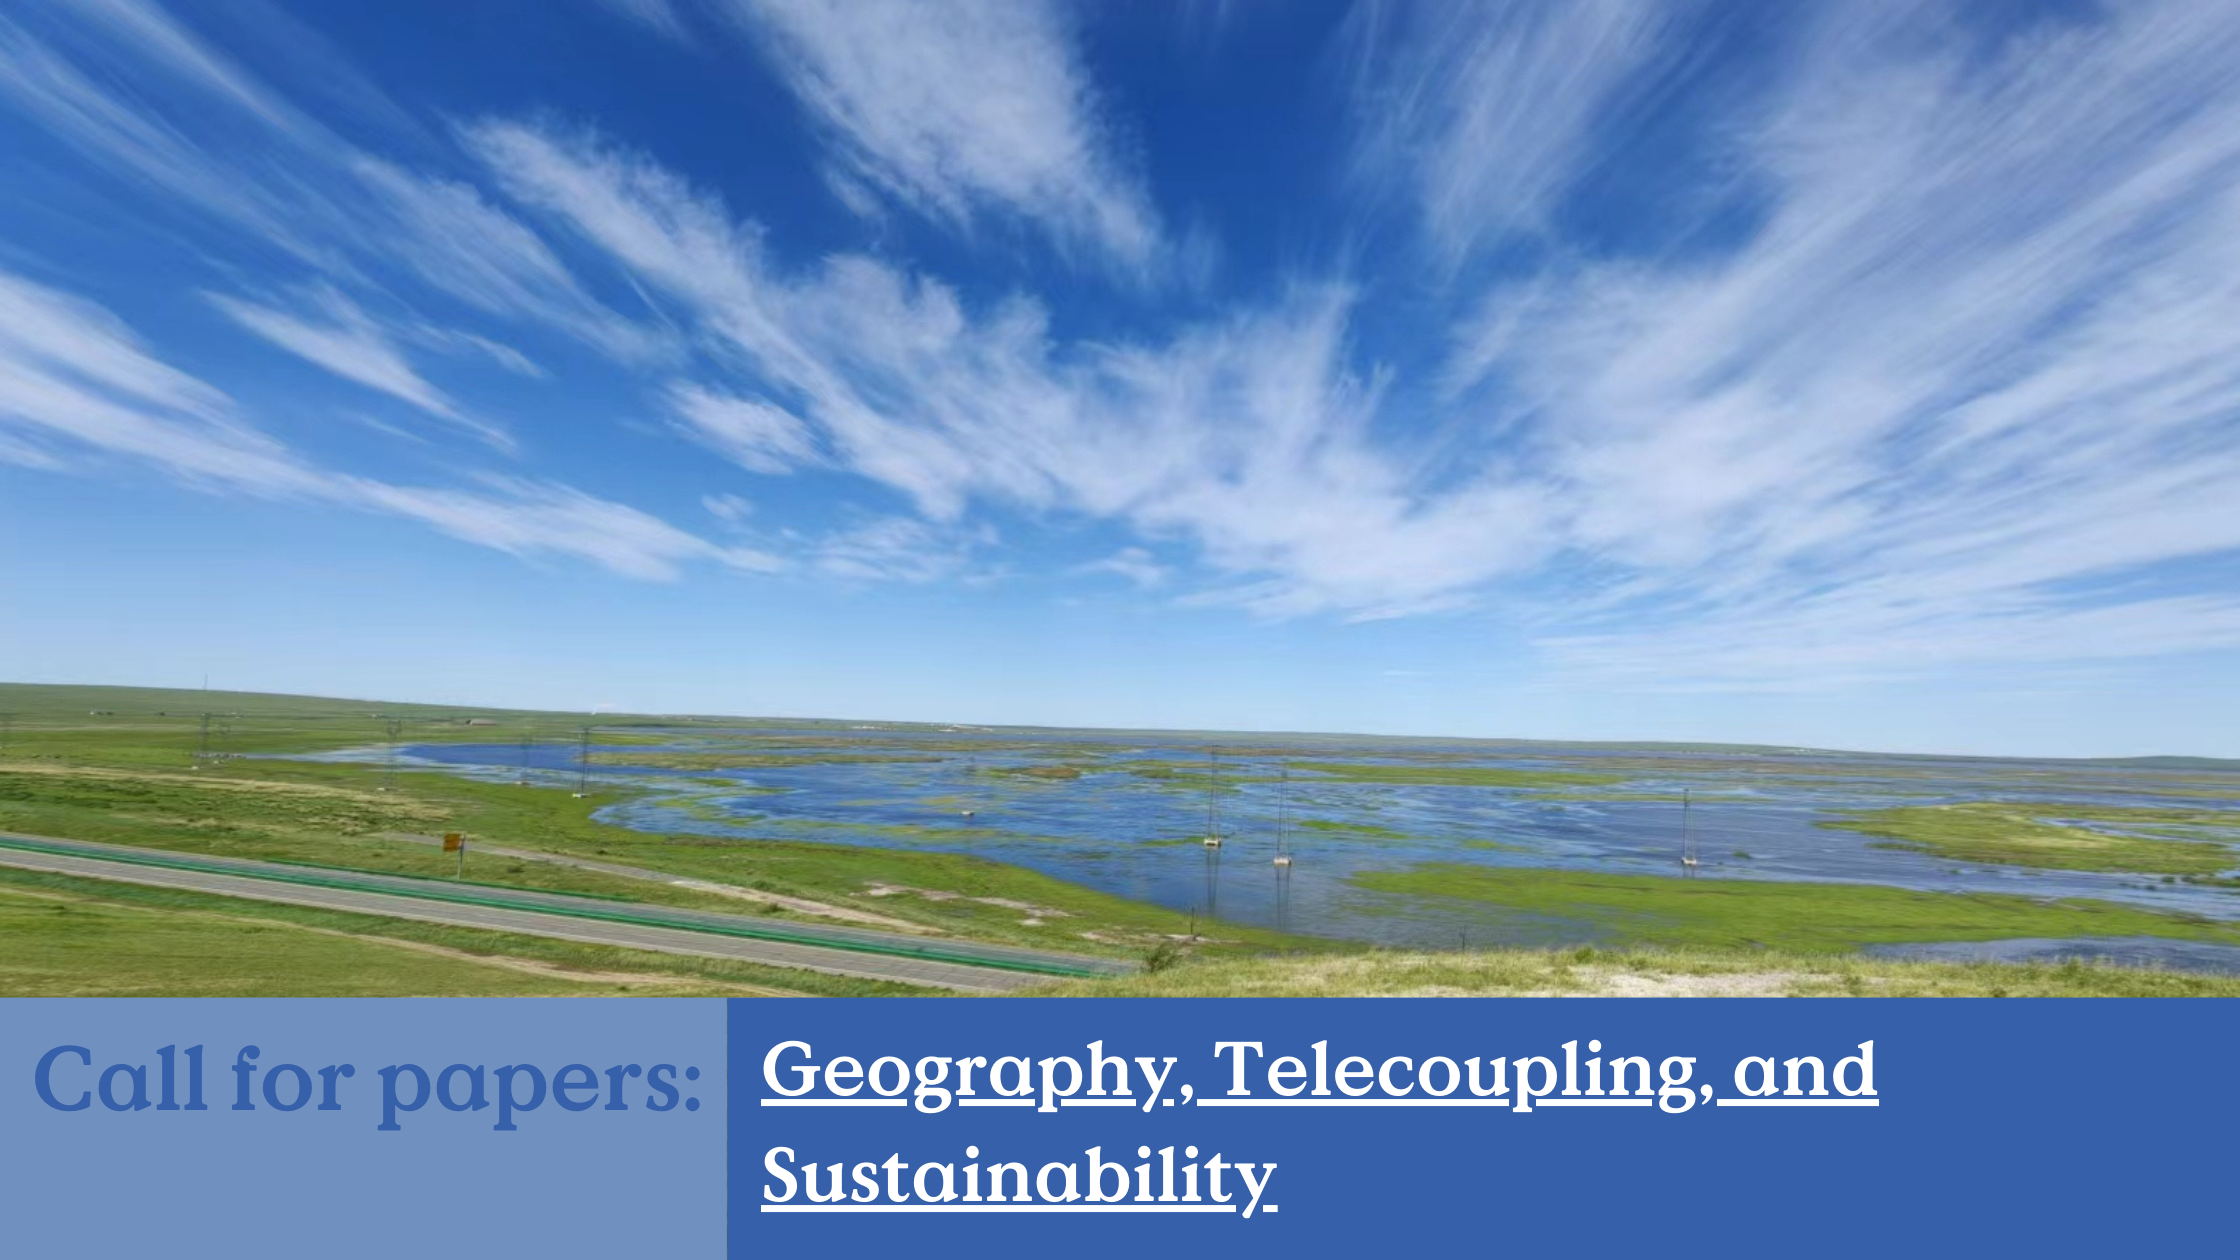 Geography, Telecoupling, and Sustainability